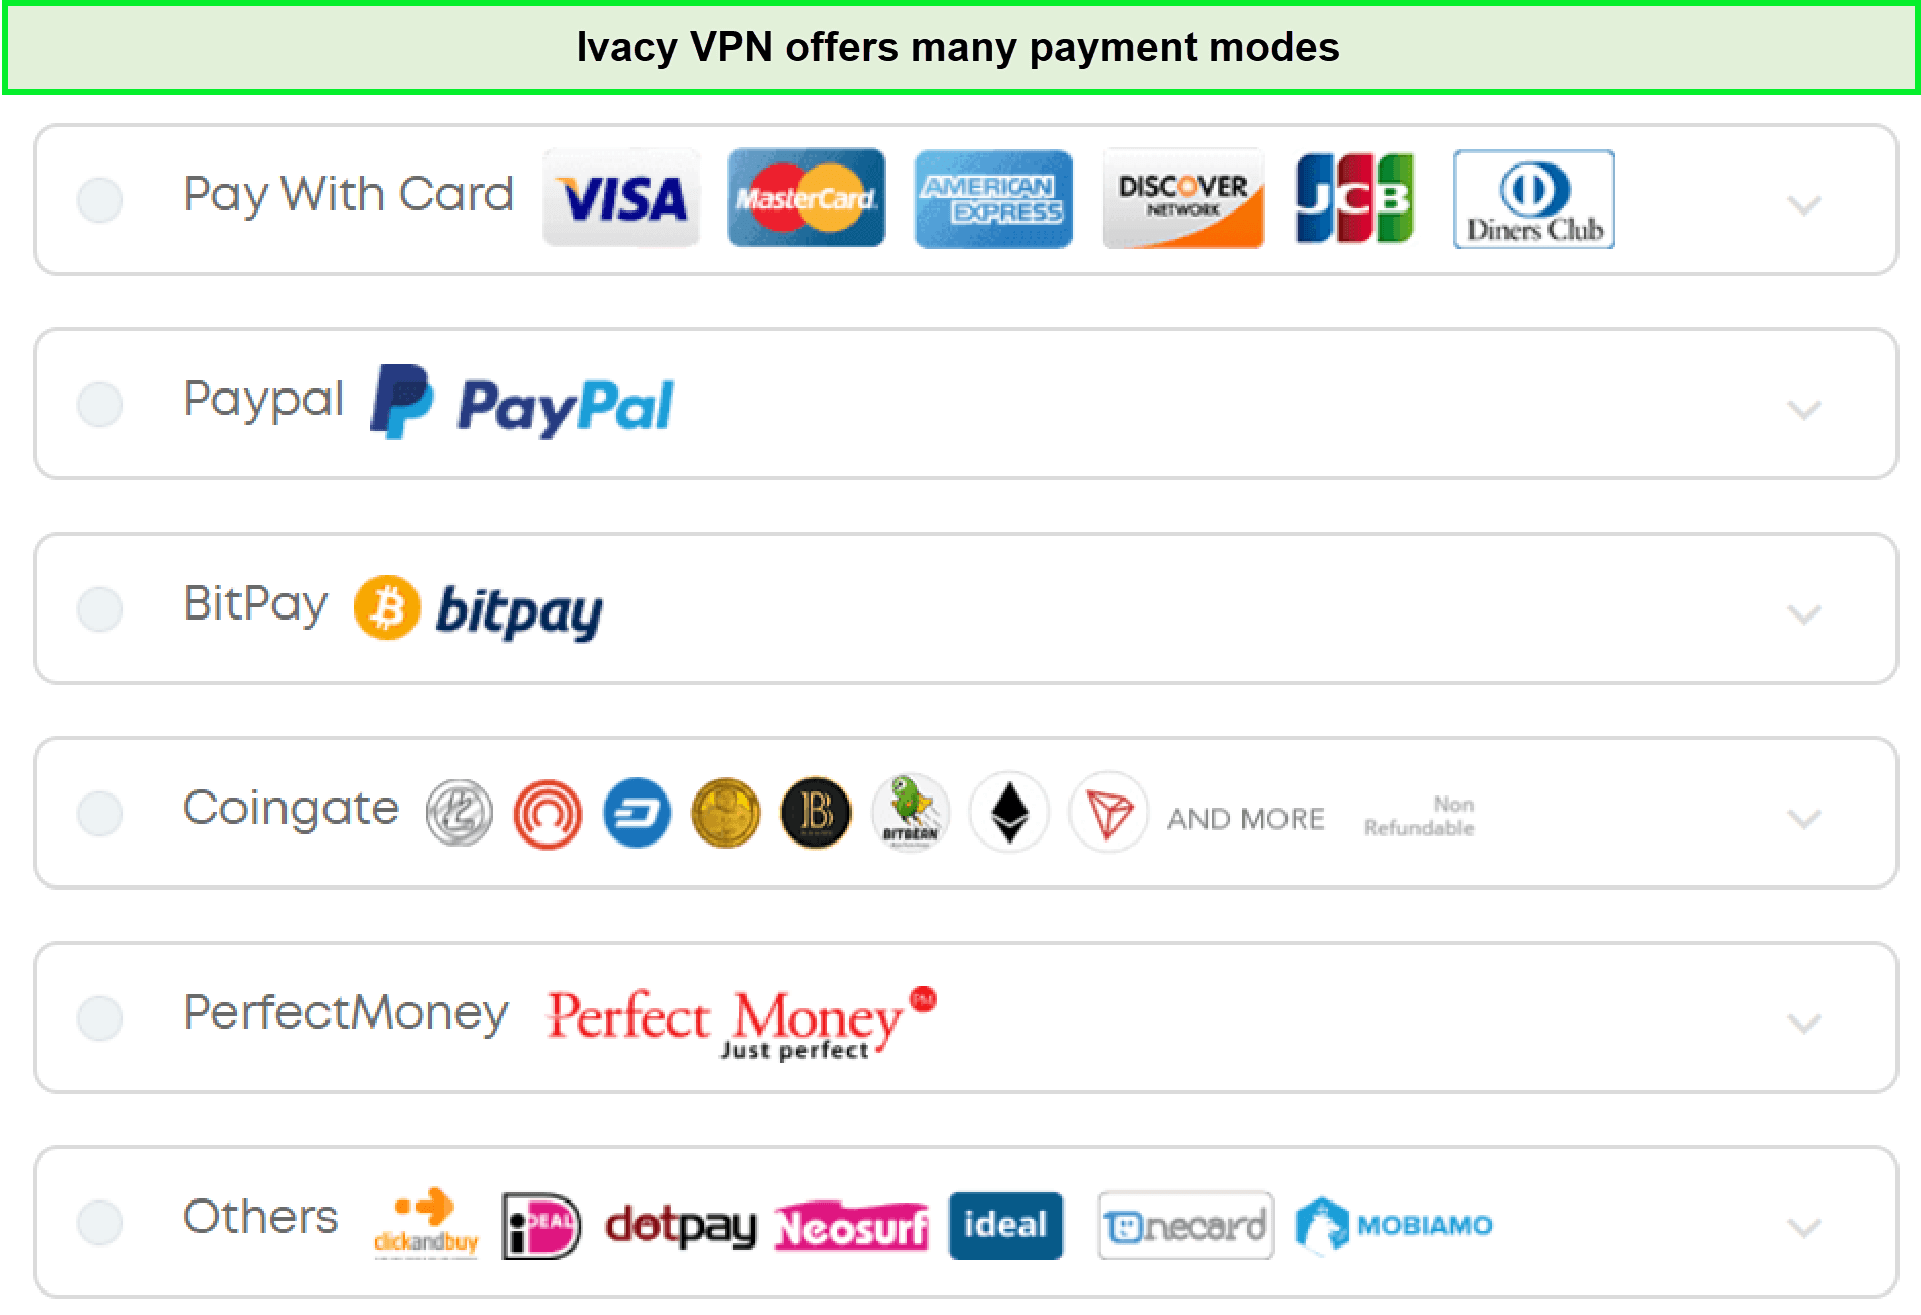 ivacy-payment-modes-in-France